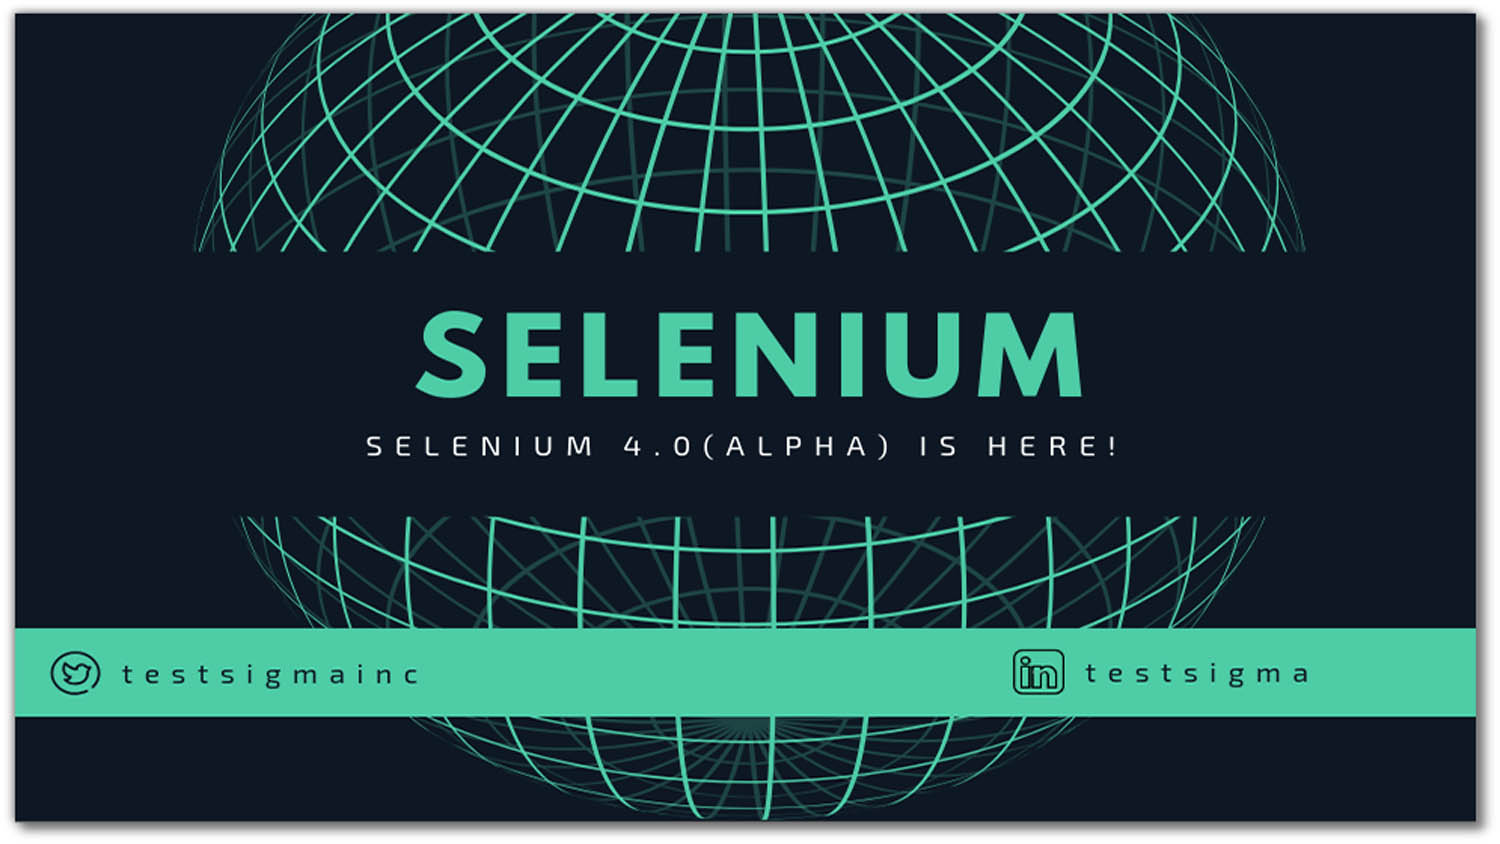 Selenium 4.0(alpha) – What Test Automation Engineers can expect!